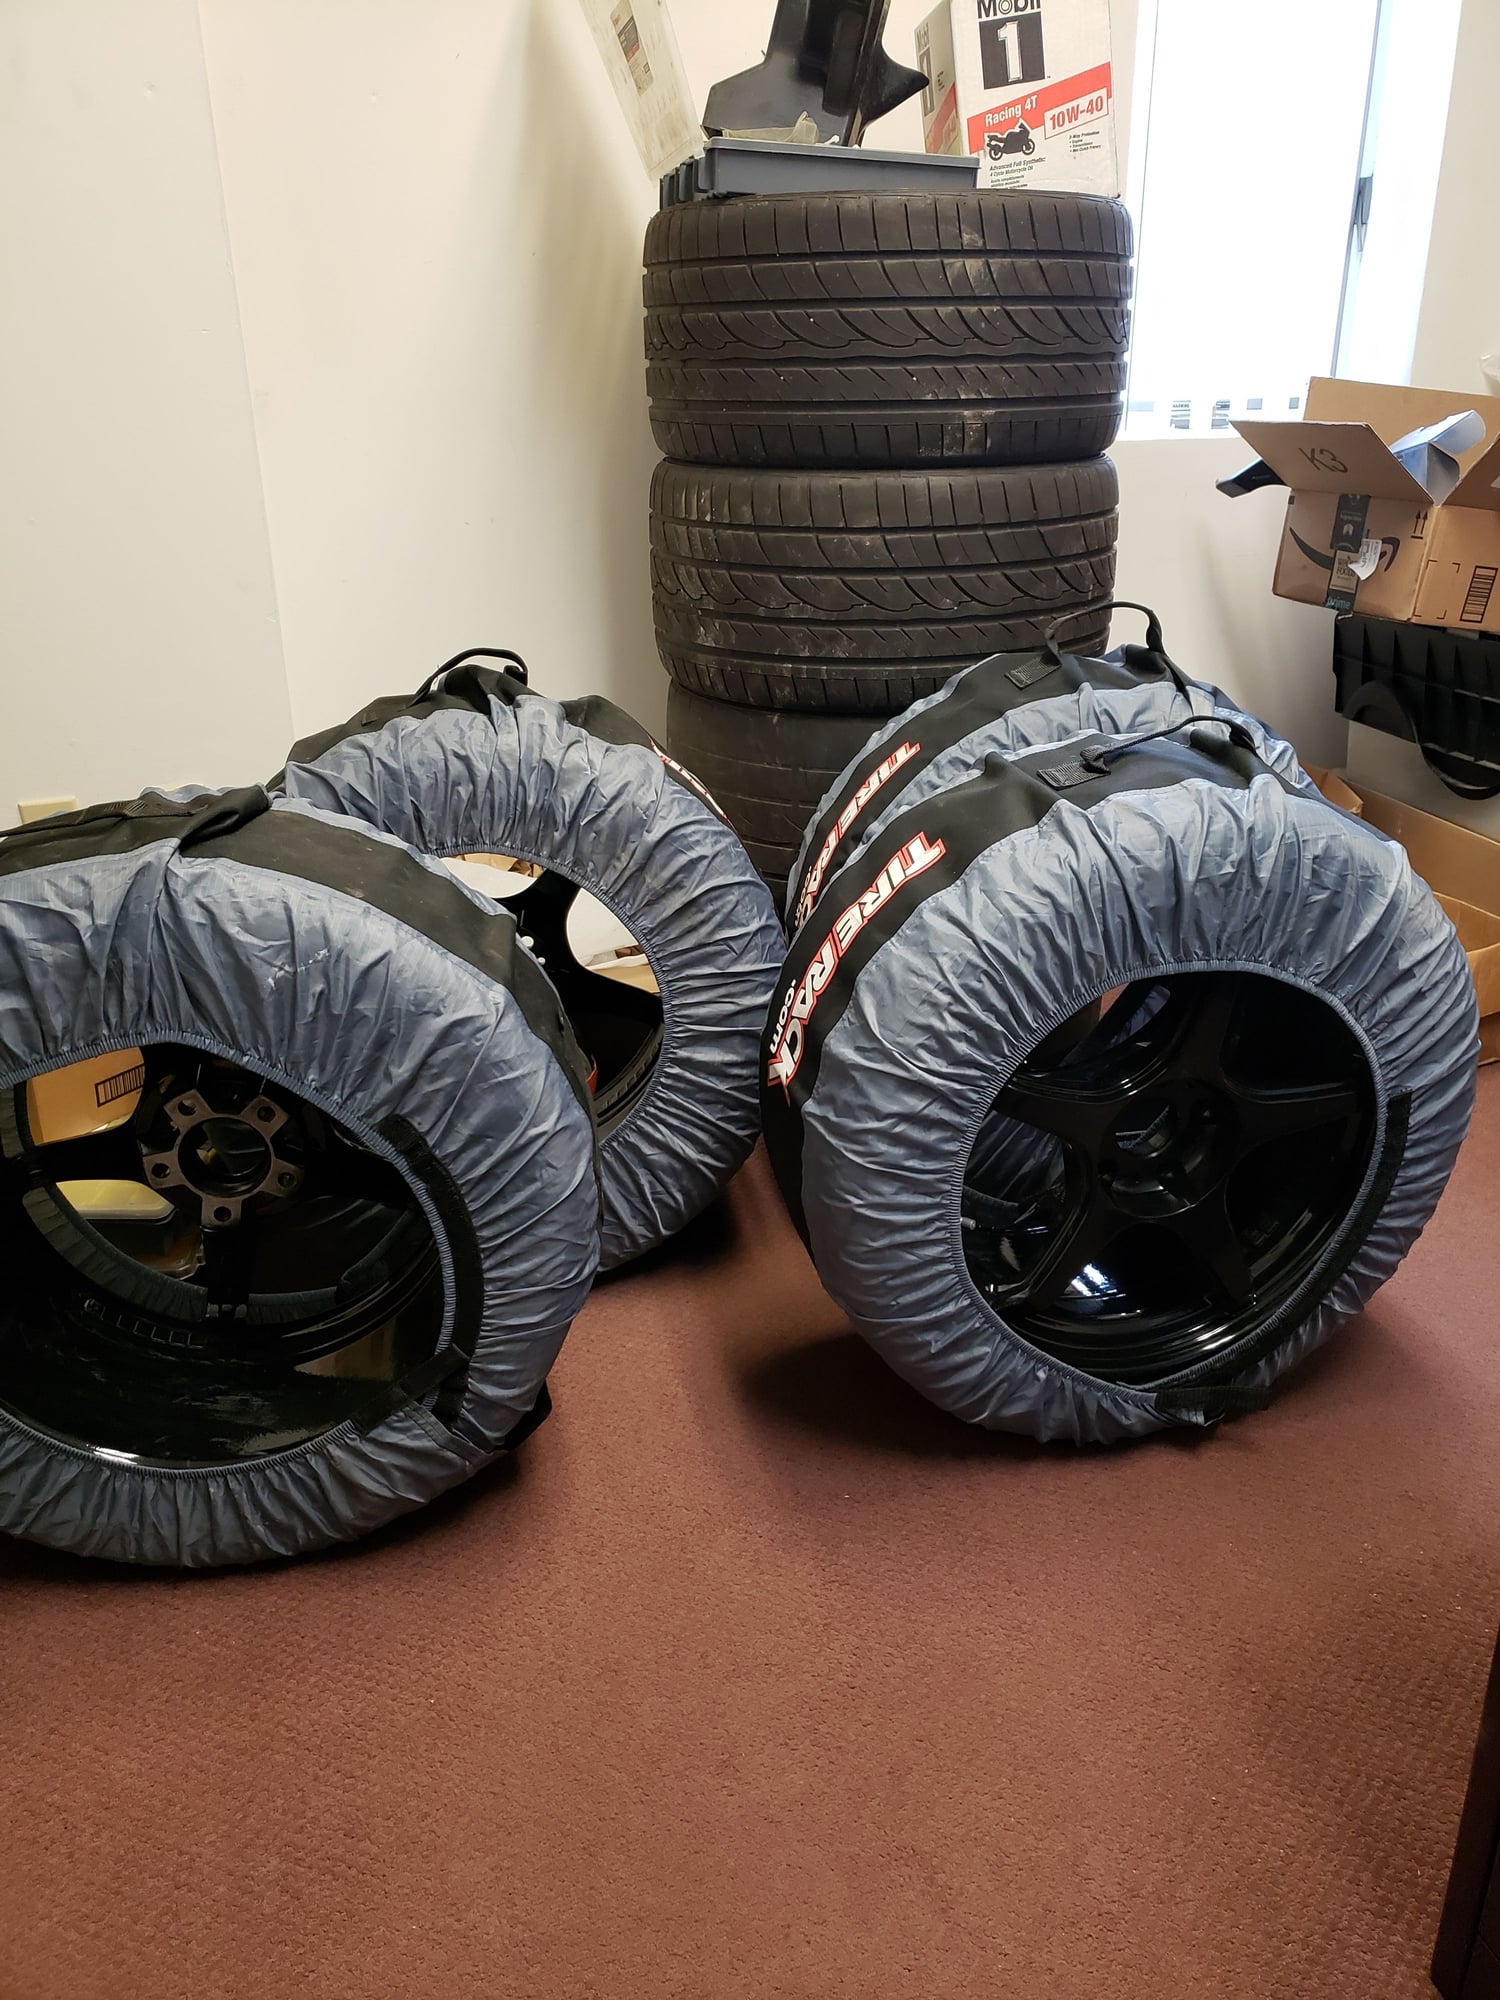 Wheels and Tires/Axles - Brand new Riken Raptors on brand new paint and powder coated D-Force 18x10 rims - New - 2008 to 2015 Mitsubishi Lancer Evolution - 2000 to 2019 Ford Mustang - Queensbury, NY 12804, United States